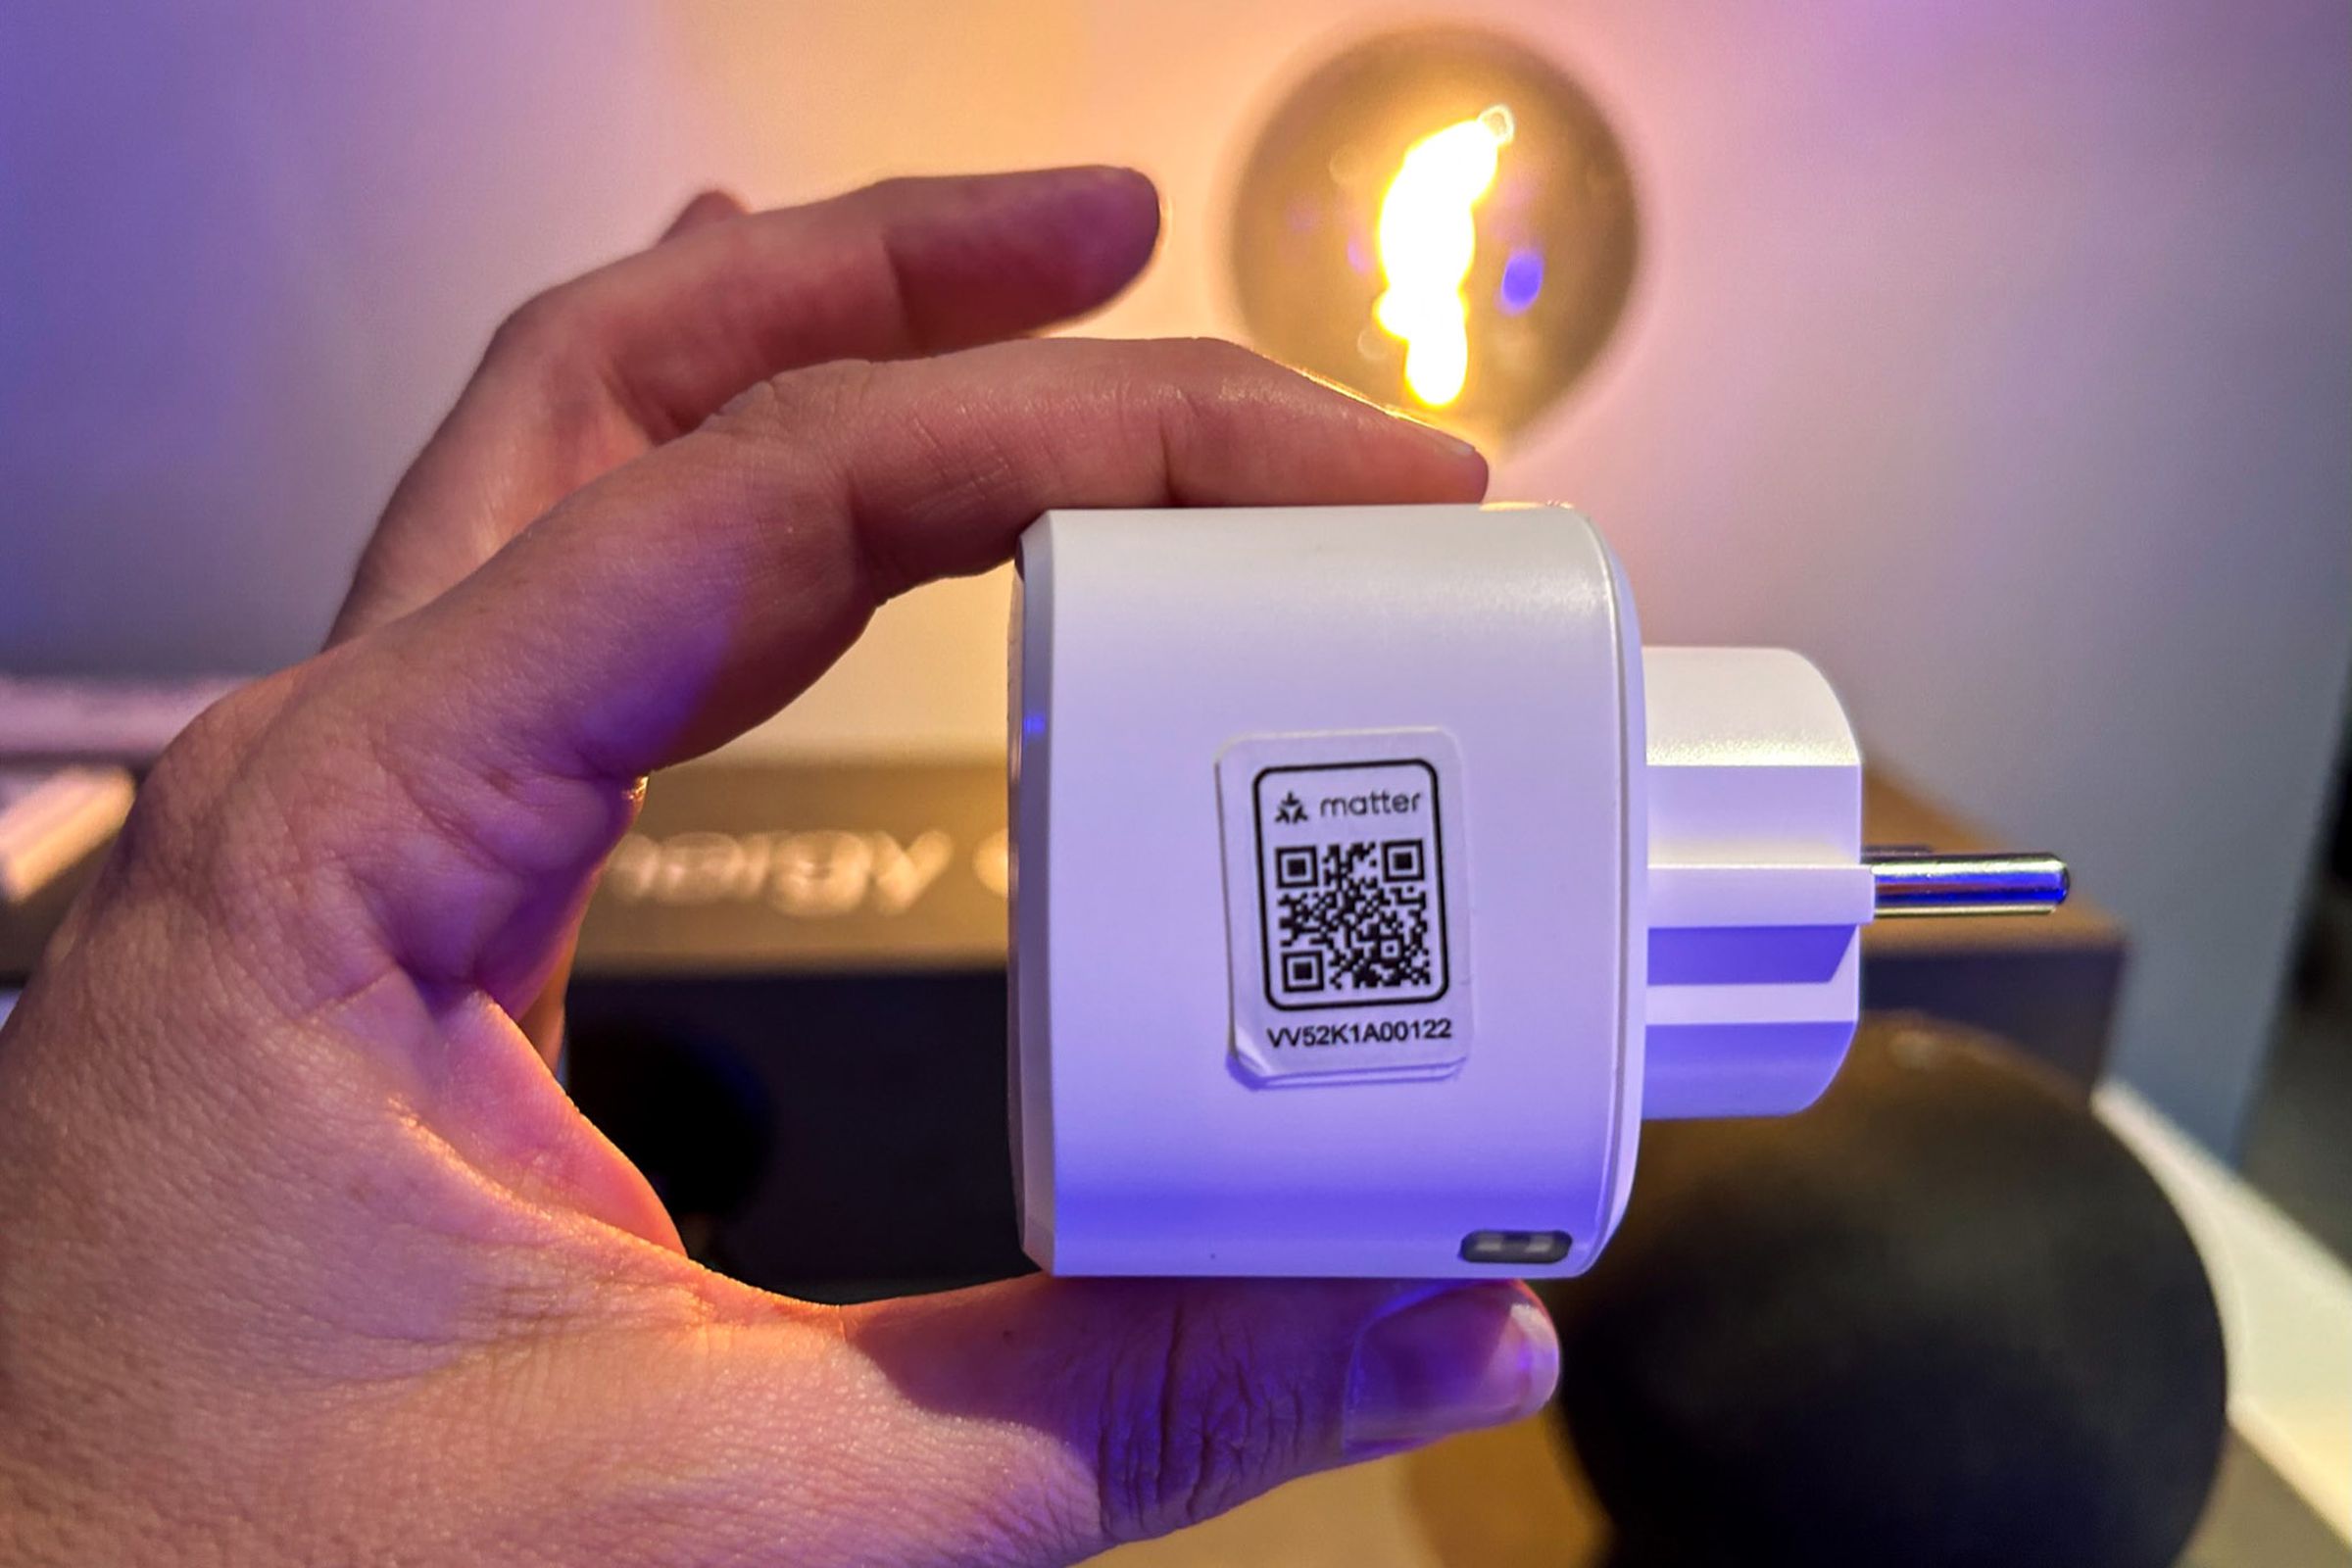 A Matter QR code on an Eve Energy smart plug. To pair a device to a Matter app, you’ll just need to scan this code.